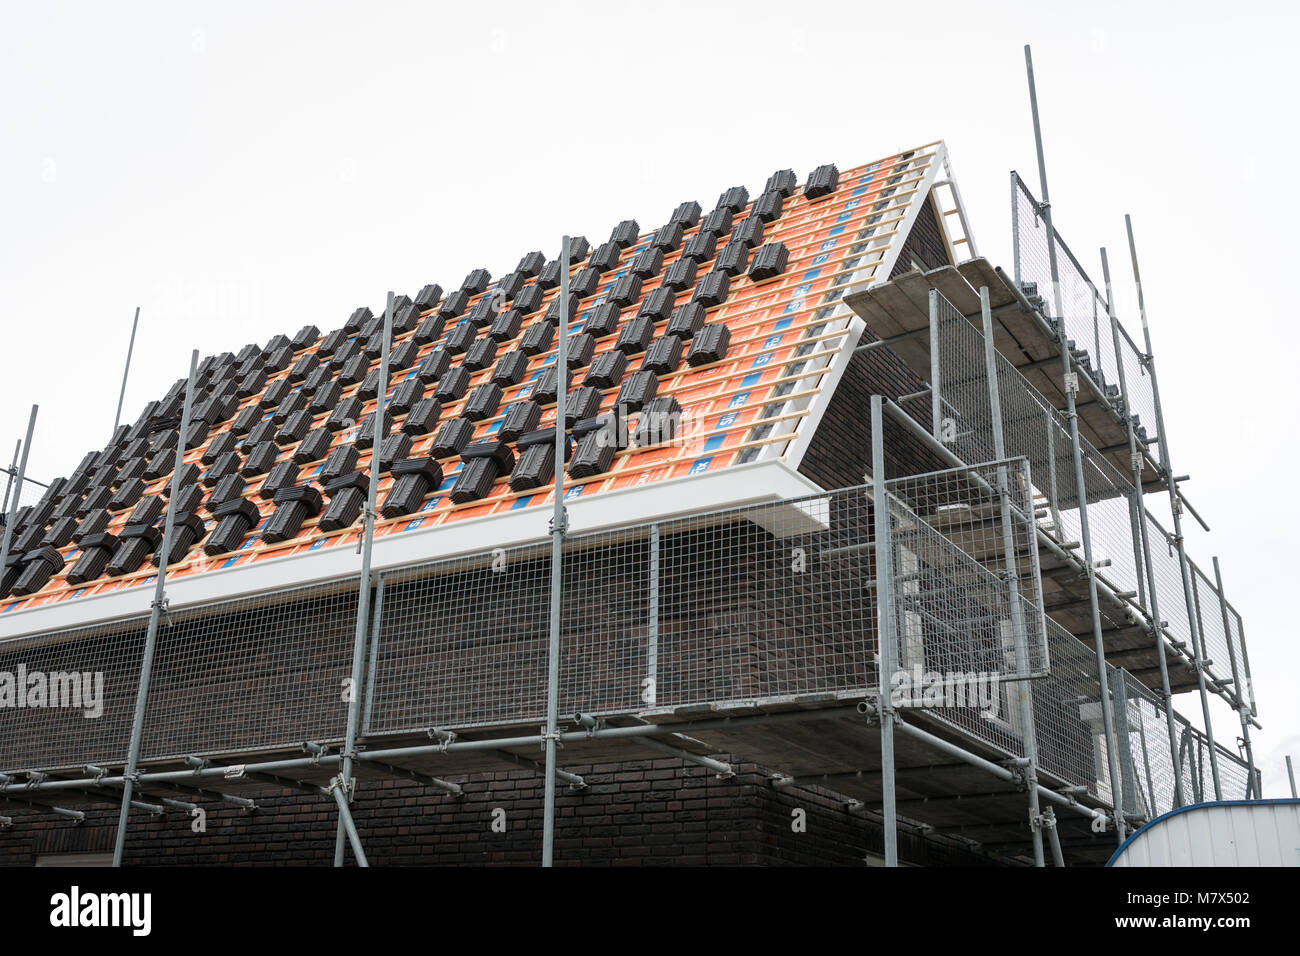 New building of house with isolation and roof tiles ready to be installed Stock Photo